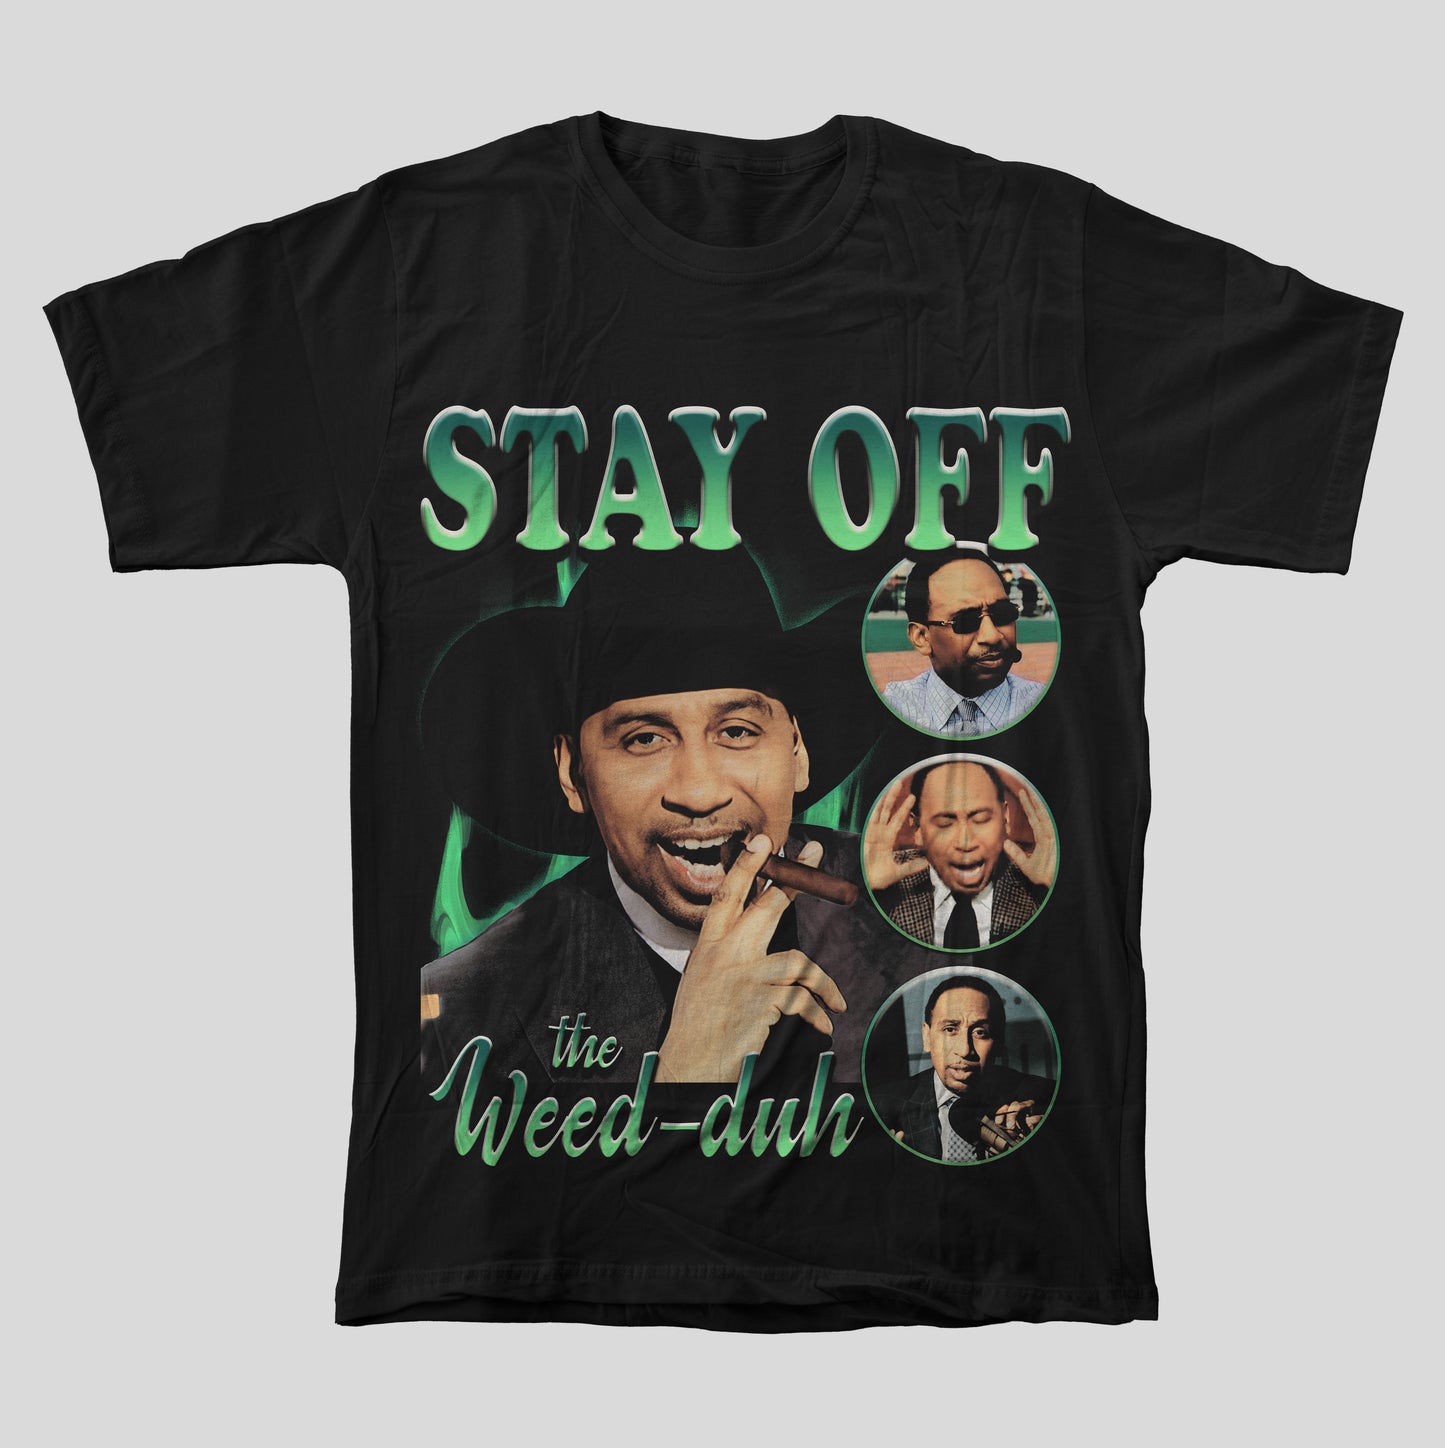 Stay Off The Weed-Duh Vintage Bootleg T-Shirt